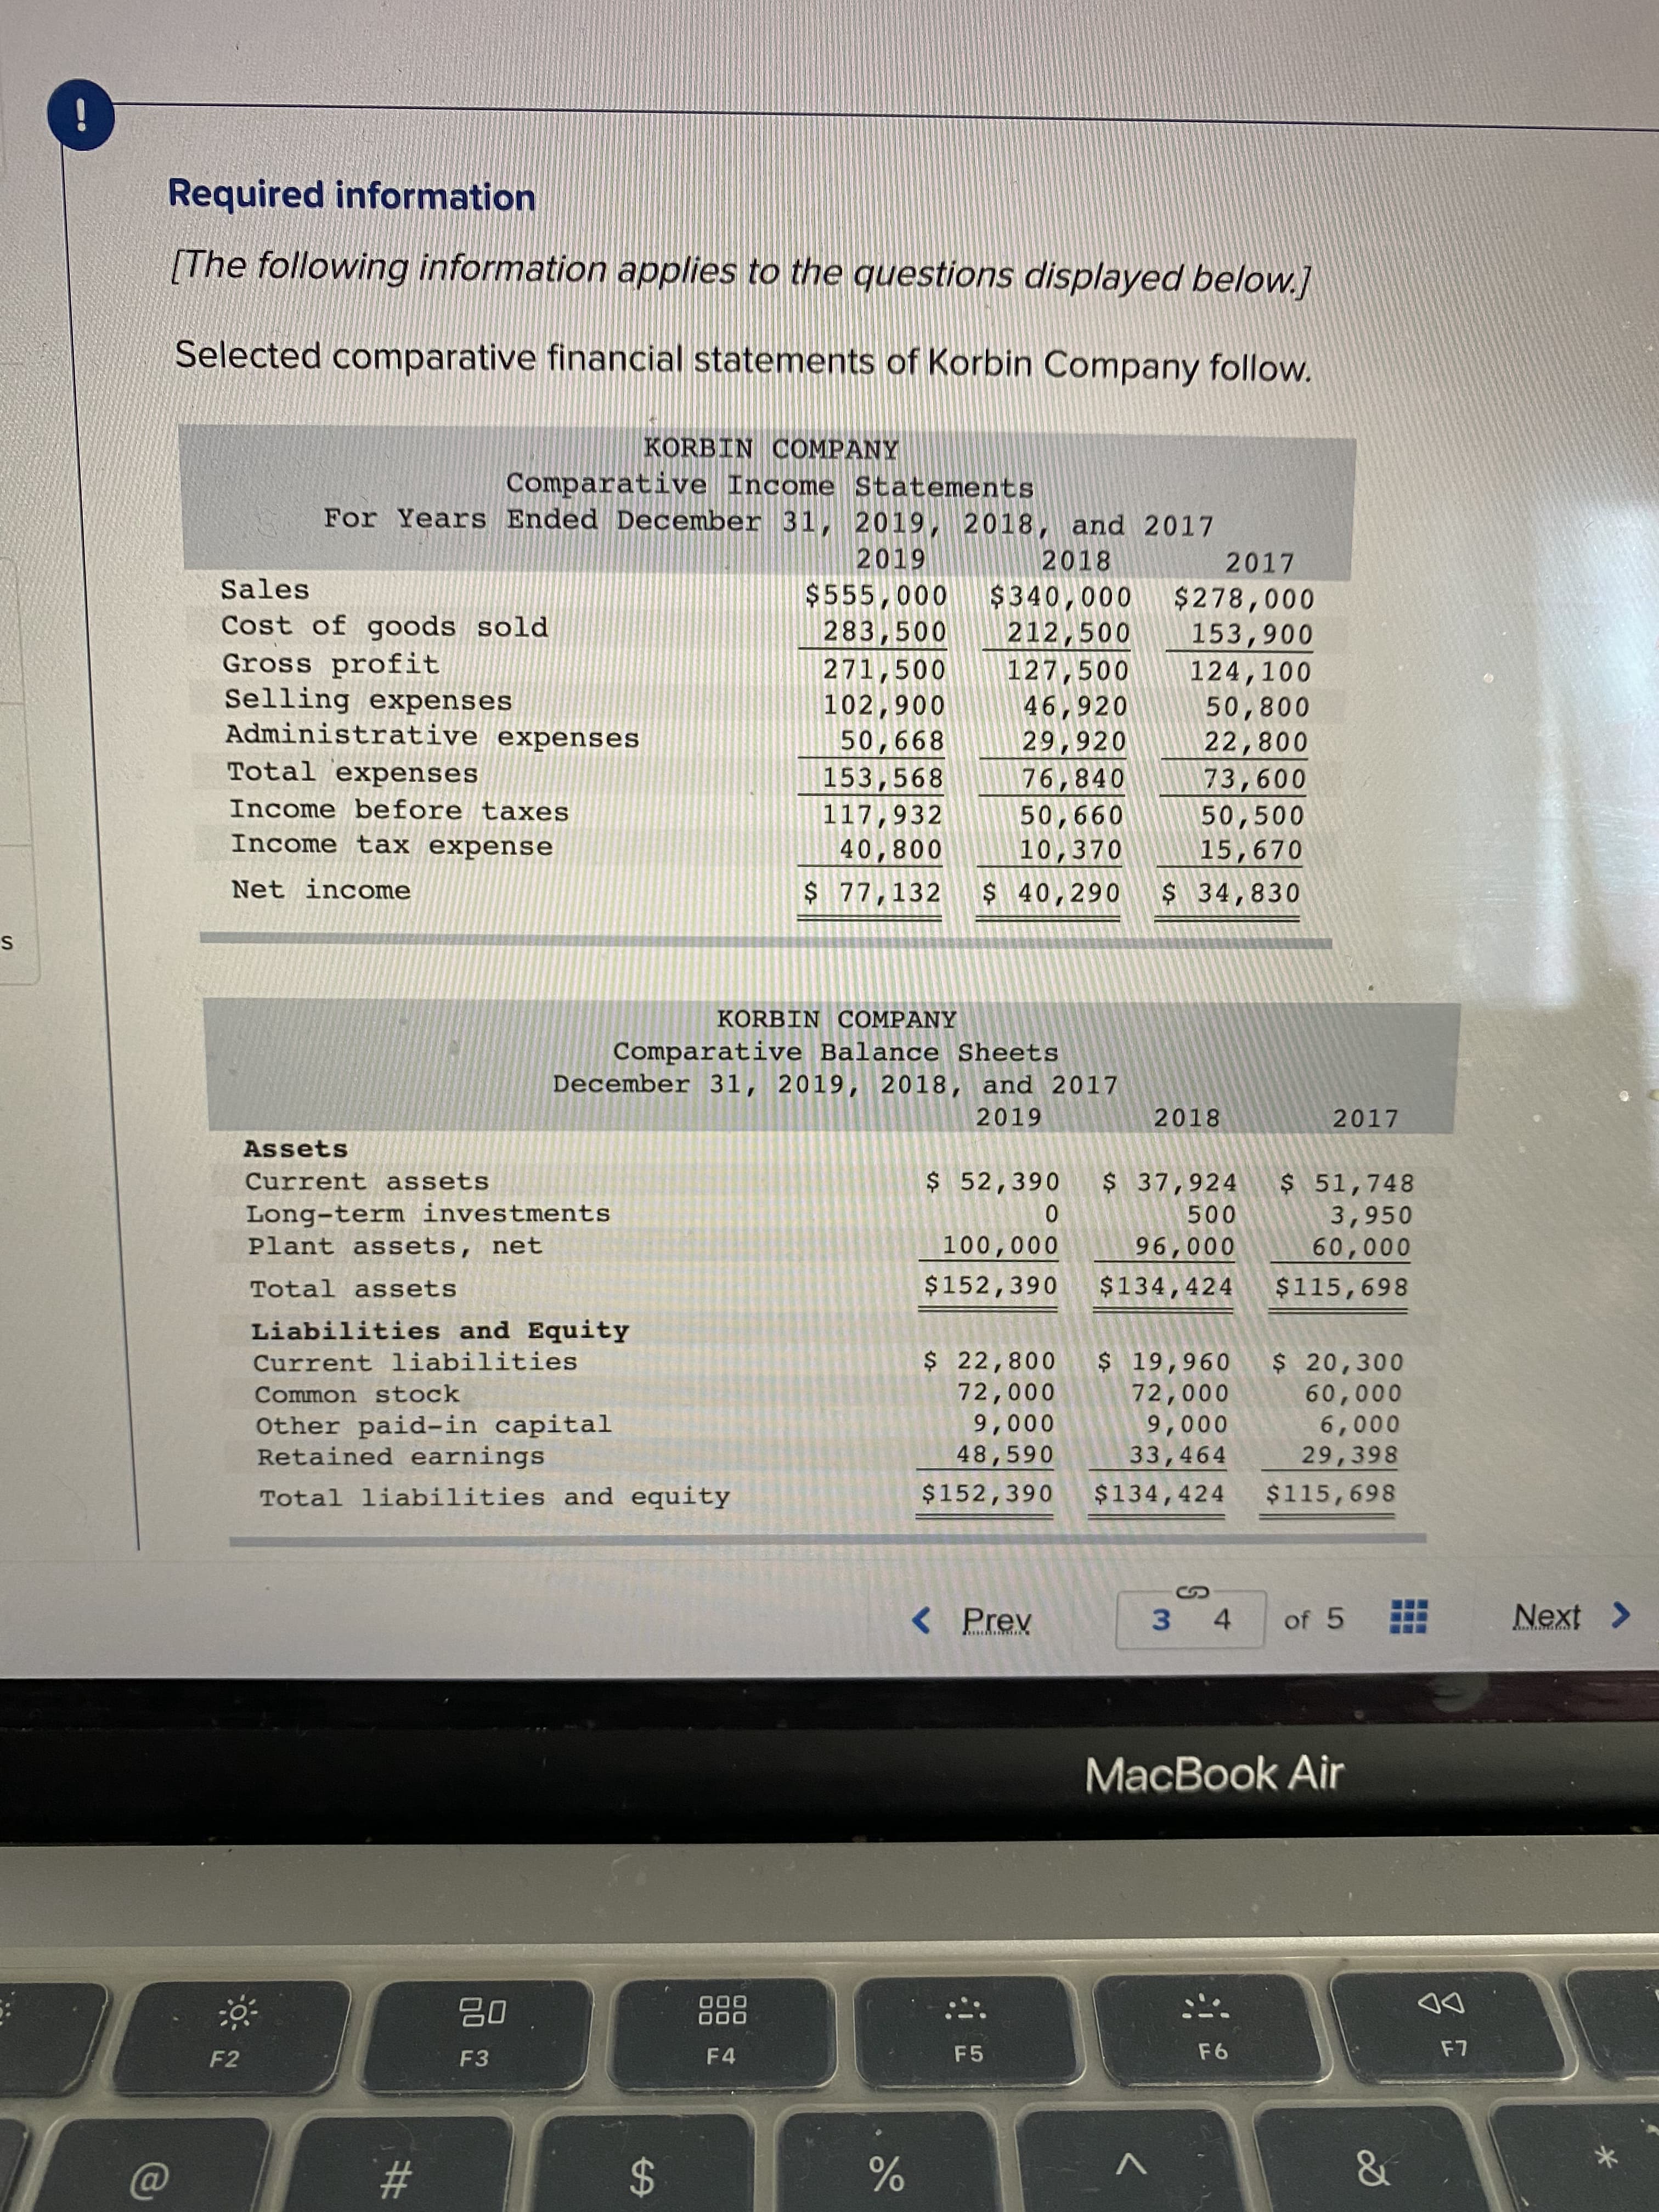 KORBIN COMPANY
Comparative Balance Sheets
December 31, 2019, 2018, and 2017
2019
2018
2017
Assets
Current assets
$ 52,390
$ 37,924
Long-term investments
Plant assets, net
$51,748
3,950
60,000
500
100,000
96,000
Total assets
$152,390
$134,424
$115,698
Liabilities and Equity
$ 22,800
72,000
9,000
48,590
$ 19,960
72,000
9,000
33,464
$ 20,300
60,000
6,000
29,398
Current liabilities
Common stock
Other paid-in capital
Retained earnings
Total liabilities and equity
$152,390
$134,424
$115,698
